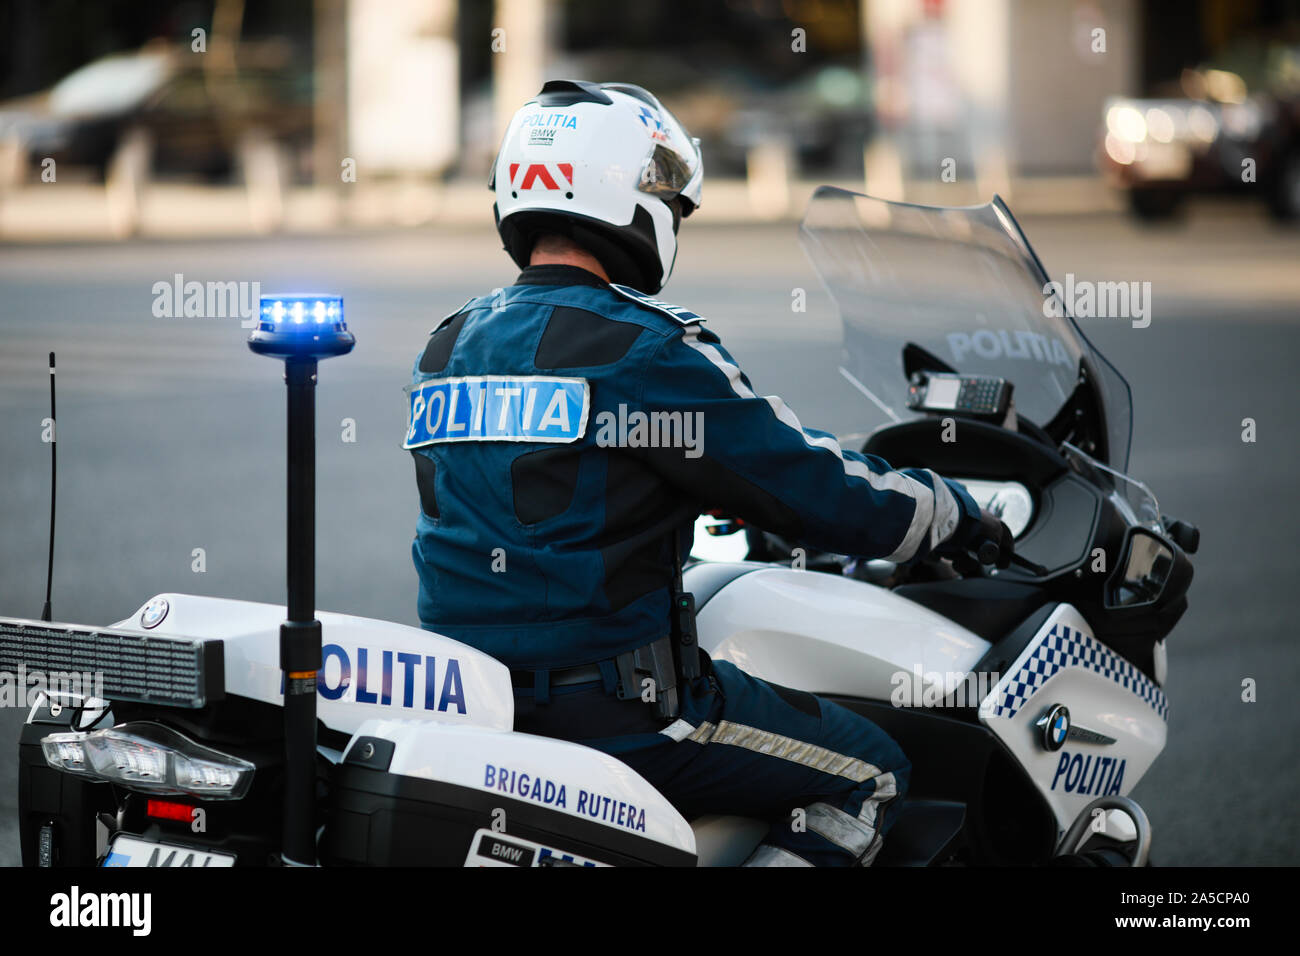 Bucharest, Romania - October 19, 2019: Police officer riding a BMW motorcycle in the Bucharest city traffic. Stock Photo